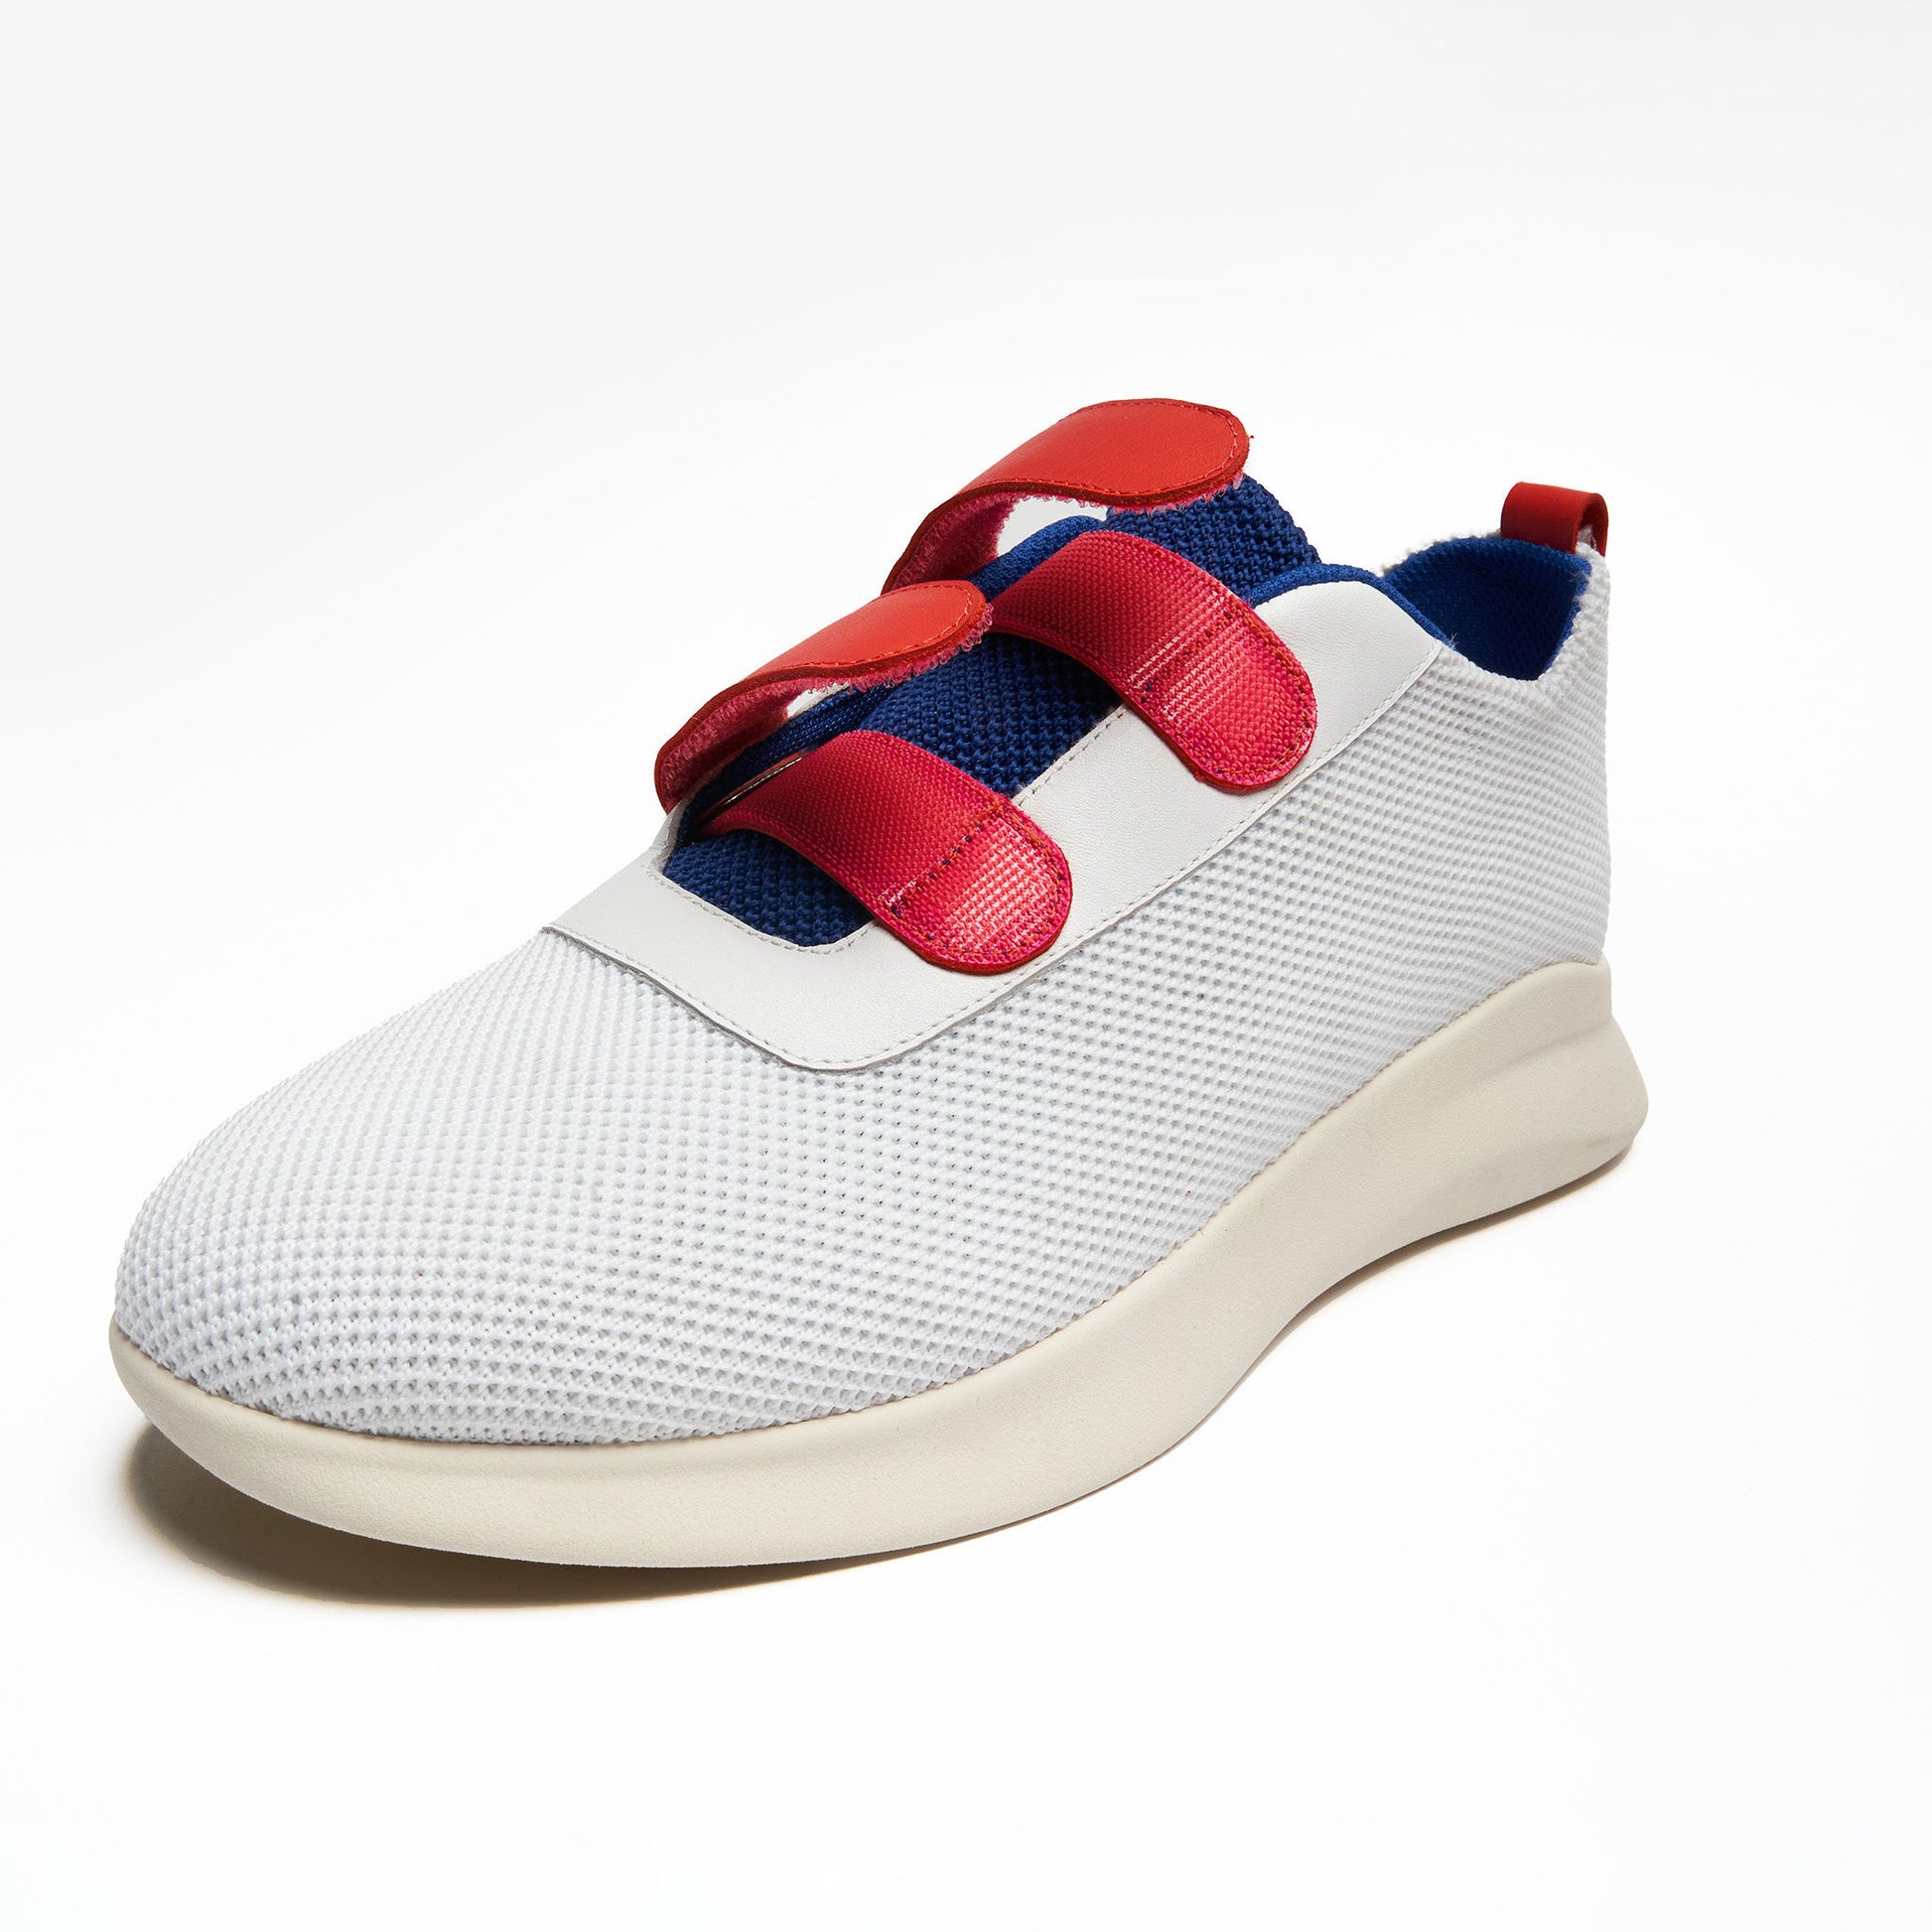 Blades Shoe Company Strap-On Velcro Shoes: The Strap-shoe of Liberty